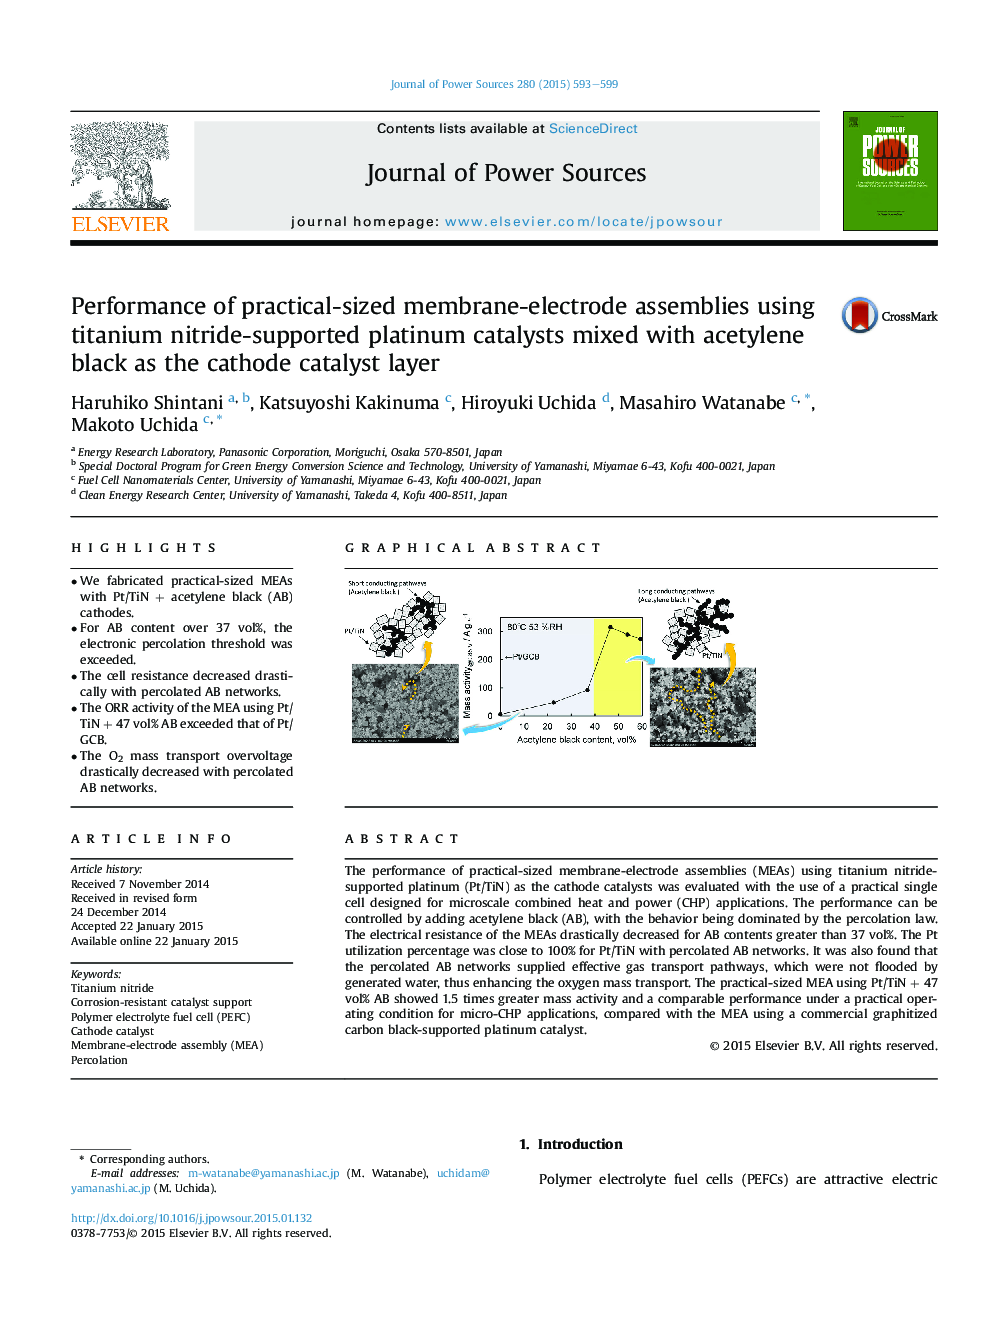 Performance of practical-sized membrane-electrode assemblies using titanium nitride-supported platinum catalysts mixed with acetylene black as the cathode catalyst layer